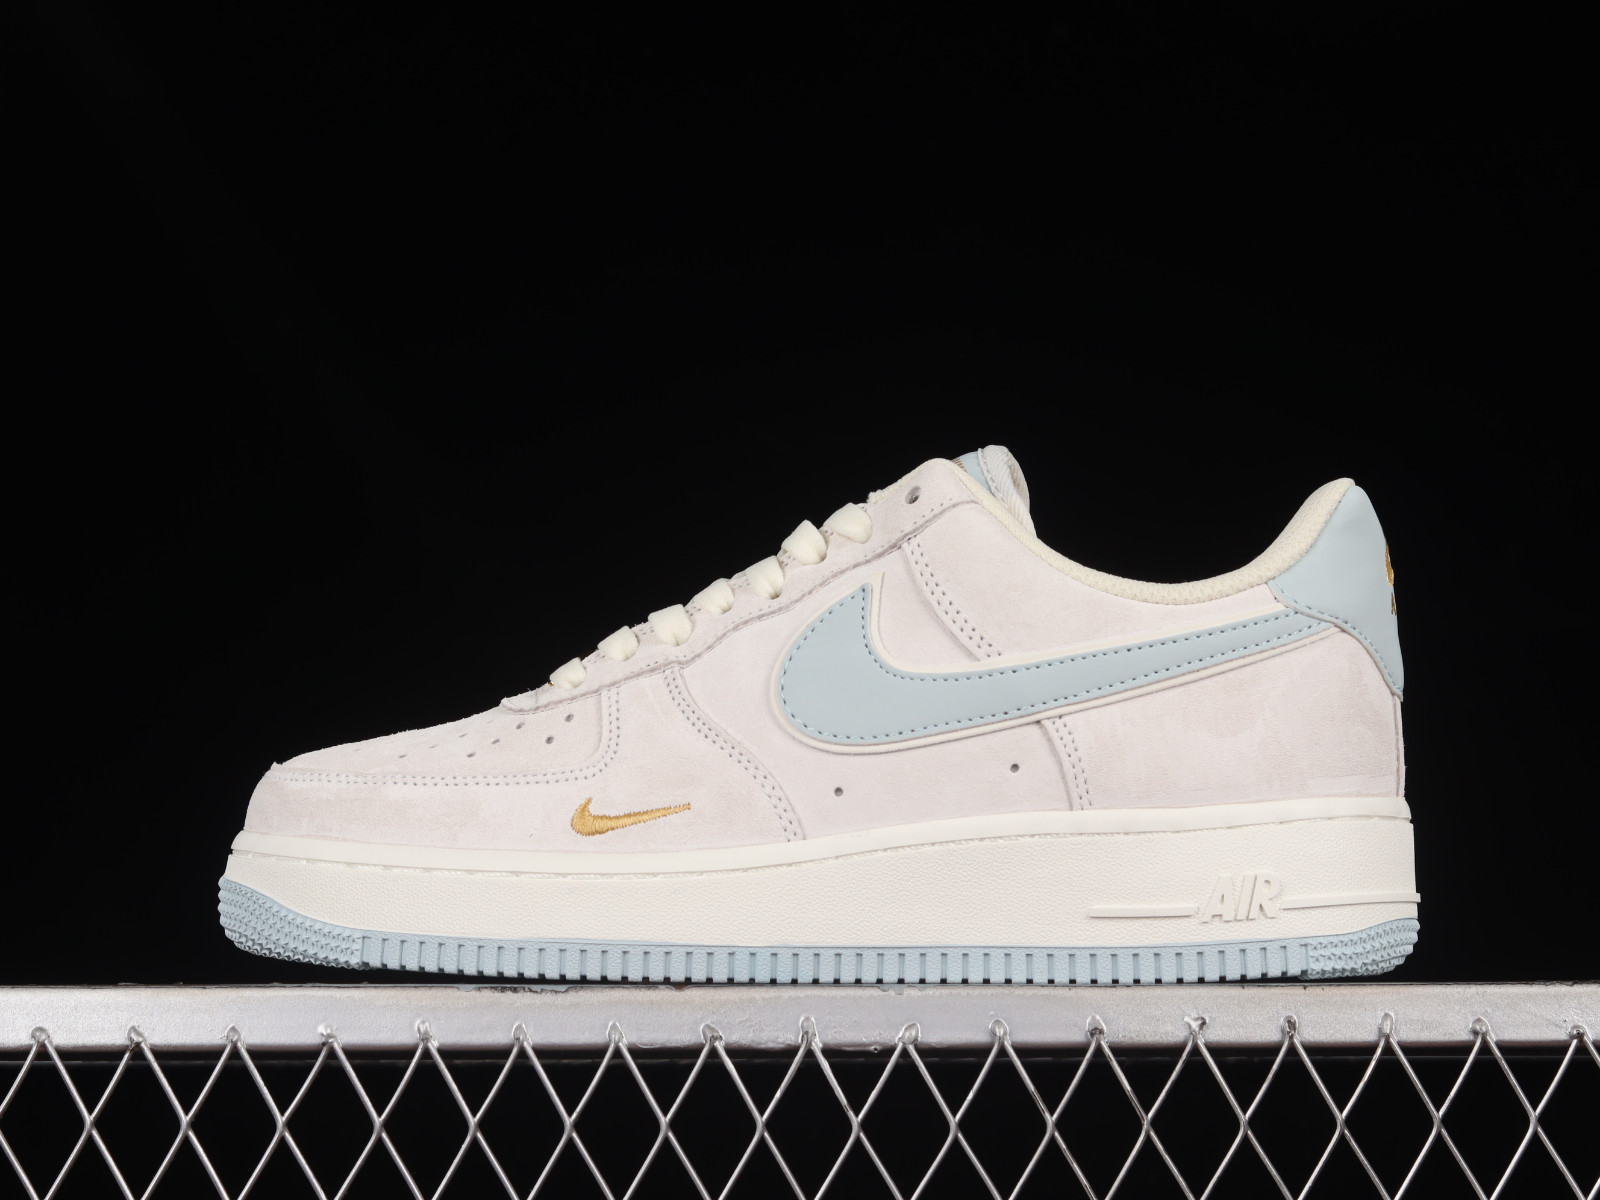 Nike Air Force 1 07 Low Suede Blue Gold KK5636 510 - nike sb ebay charity dunk - MultiscaleconsultingShops